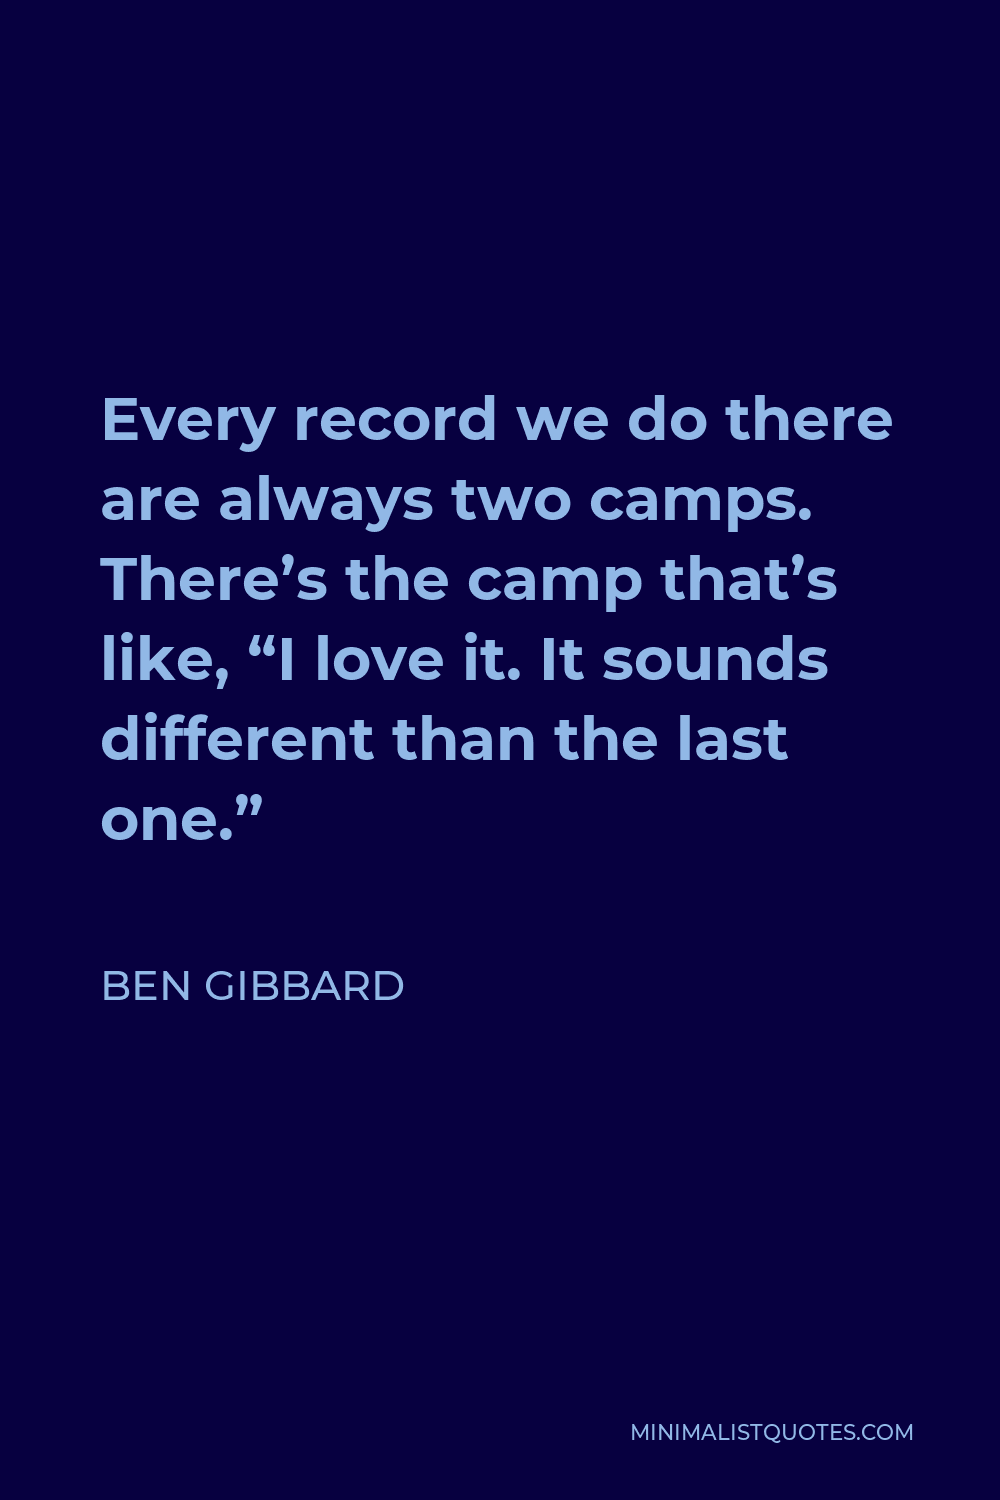 Ben Gibbard Quote - Every record we do there are always two camps. There’s the camp that’s like, “I love it. It sounds different than the last one.”